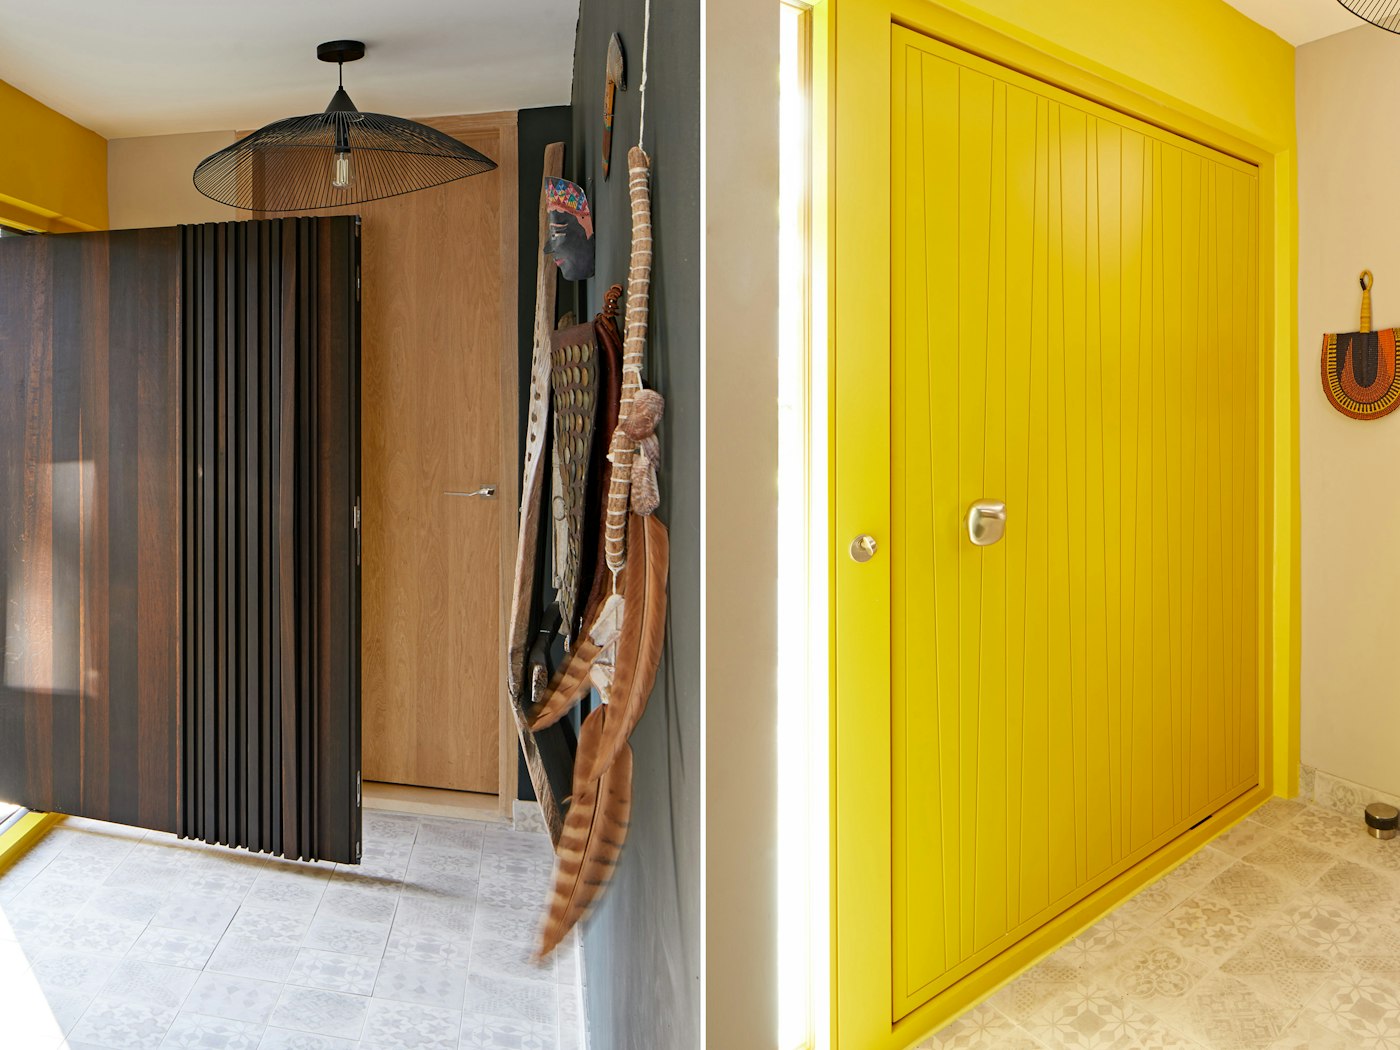 Bringing contrast and style, this dual-coloured door blends fumed oak for a more muted exterior with bold yellow inside adding warmth and energy to the interiror